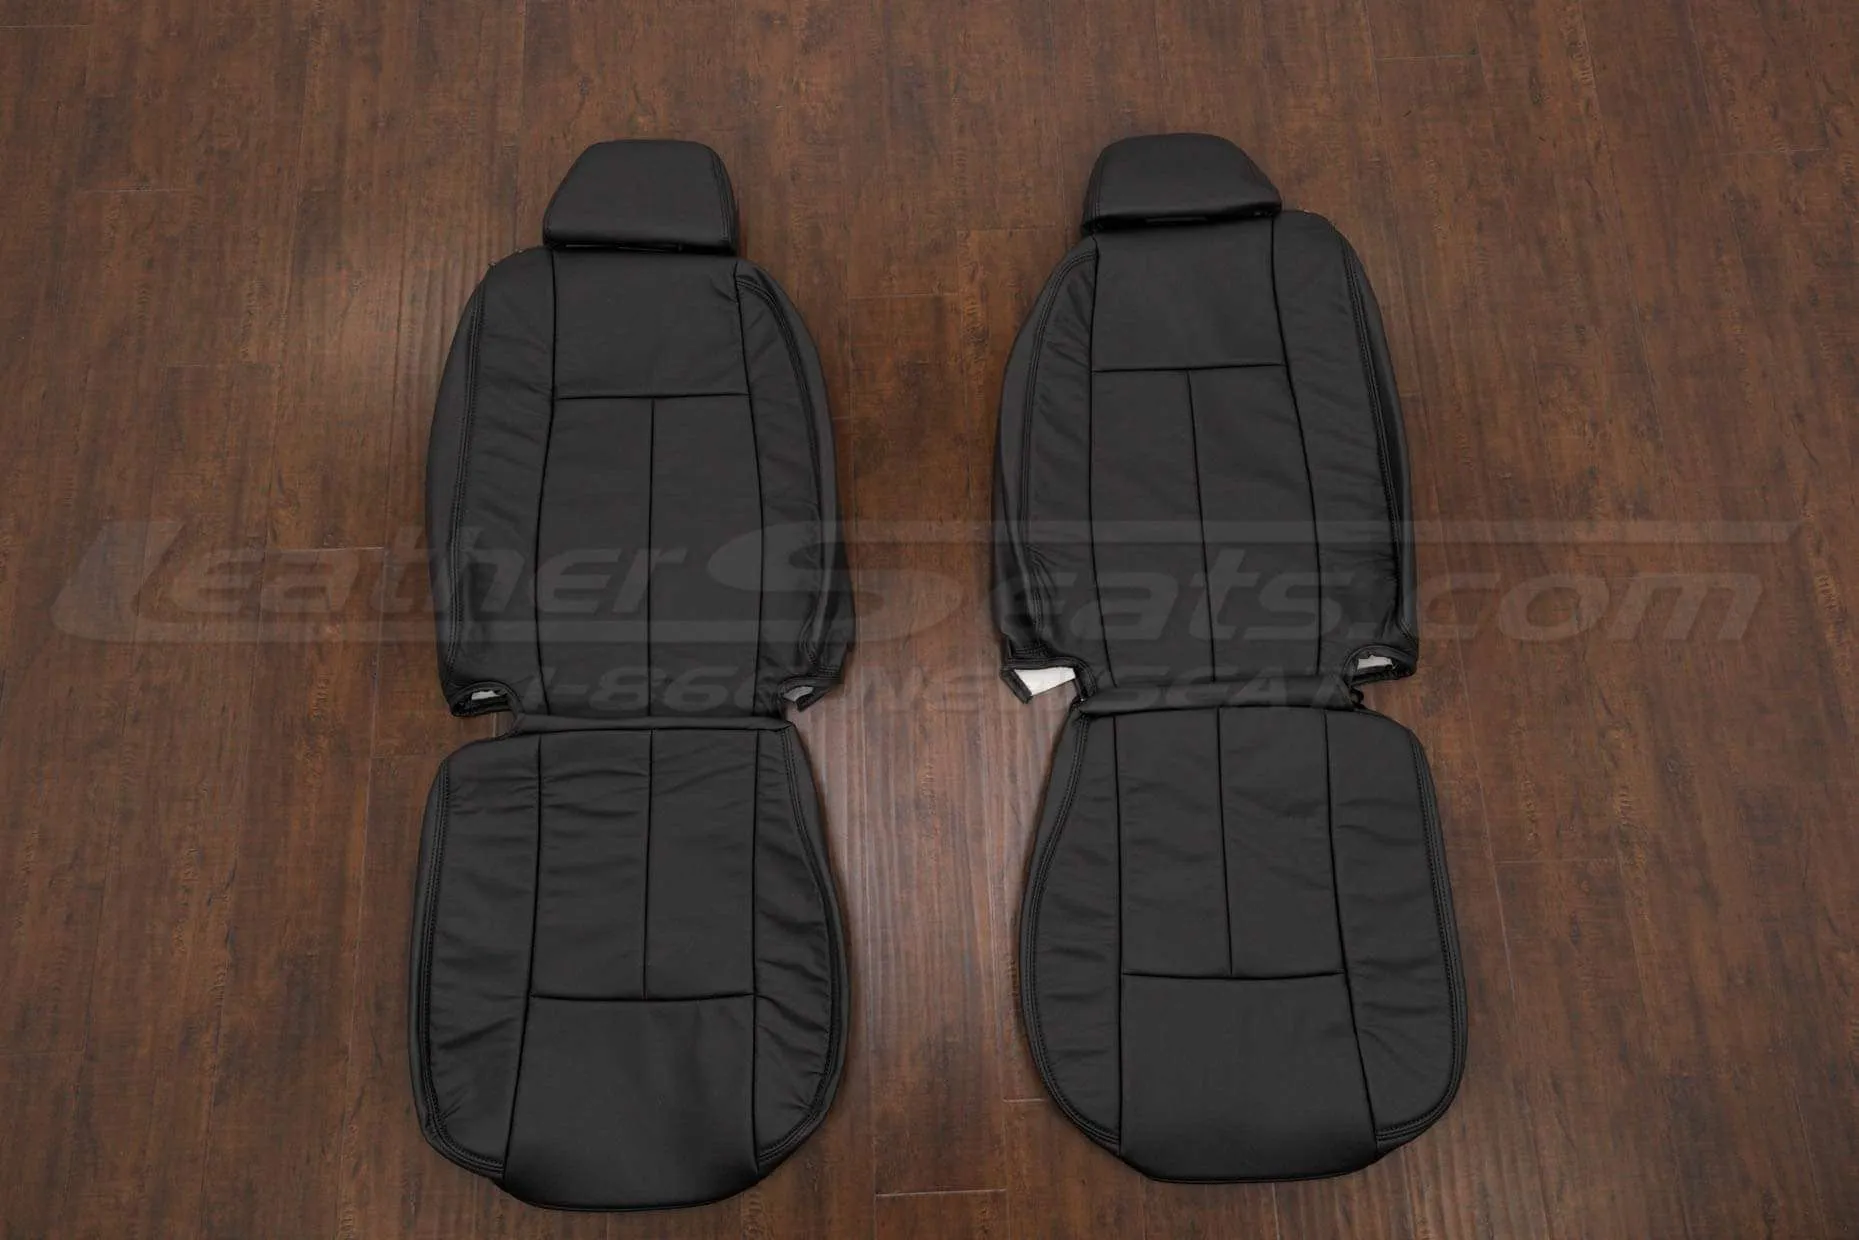 GMC Envoy Leather Seat Kit - Black - Front seat upholstery